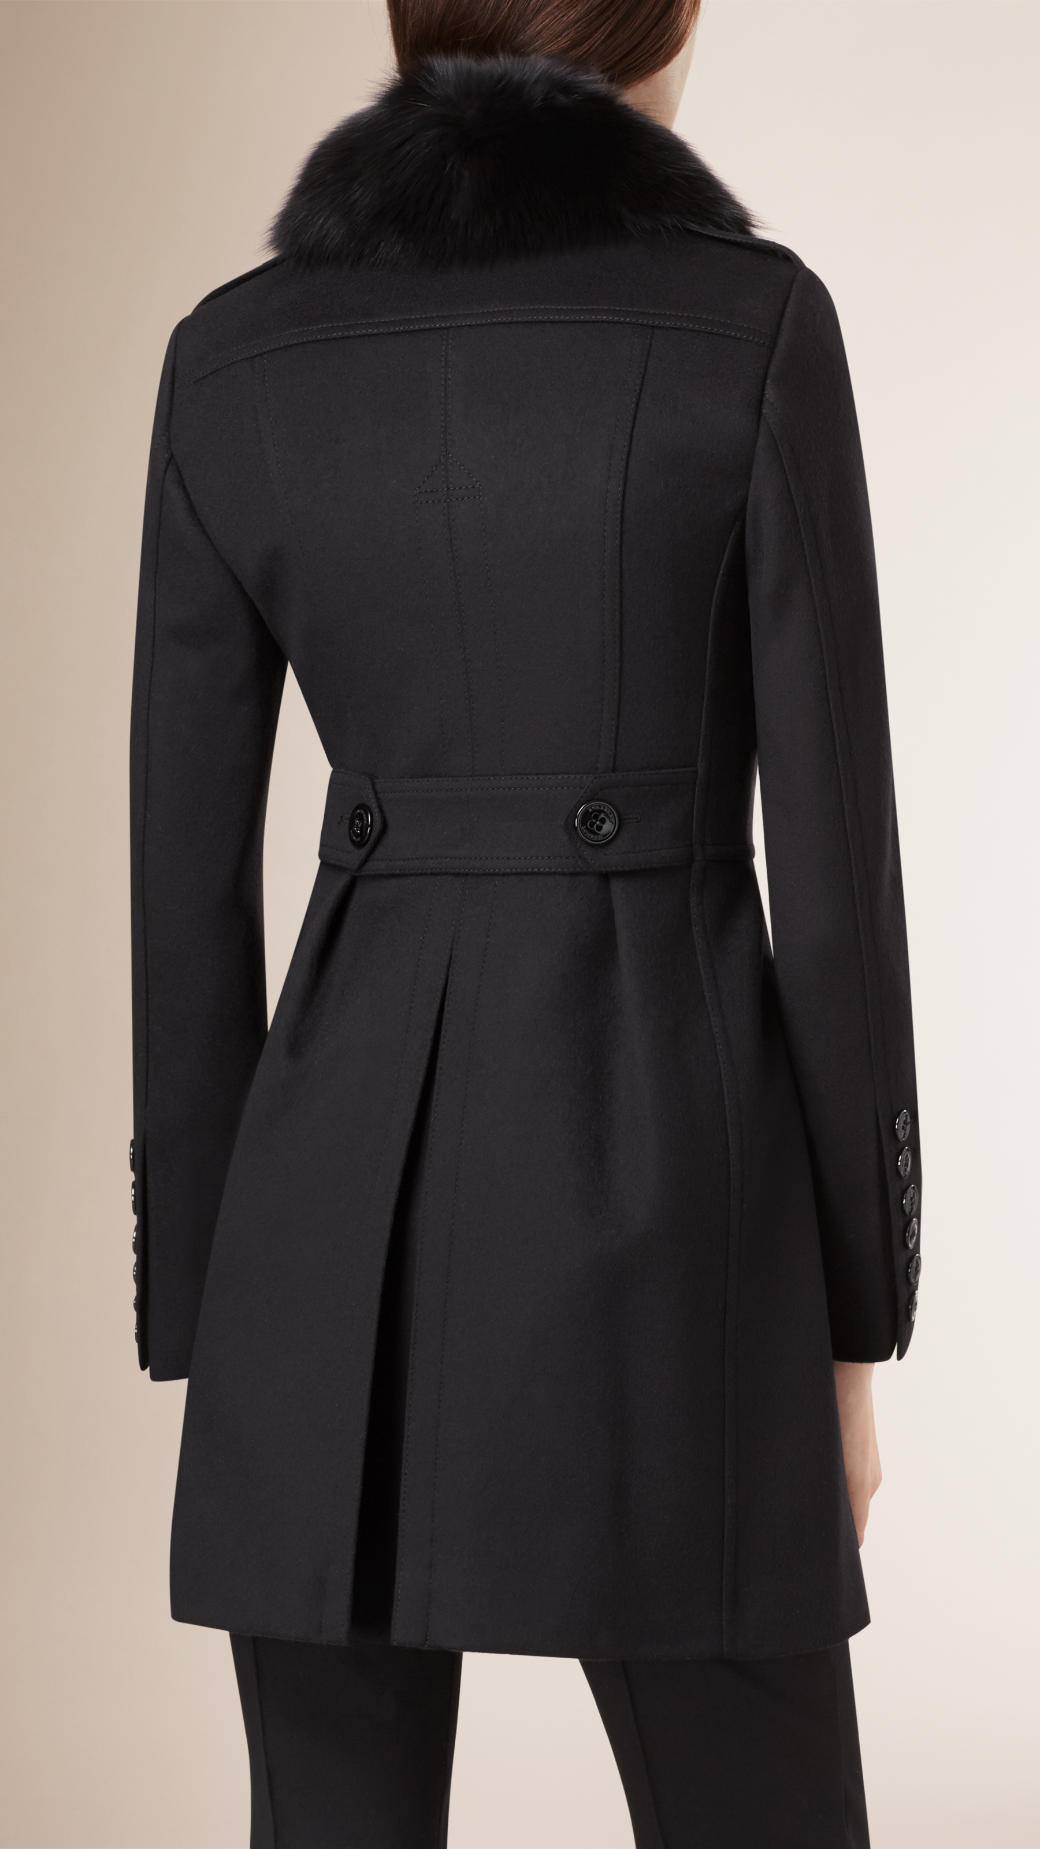 Burberry Virgin Wool Cashmere Coat With Fox Fur Collar in Black | Lyst